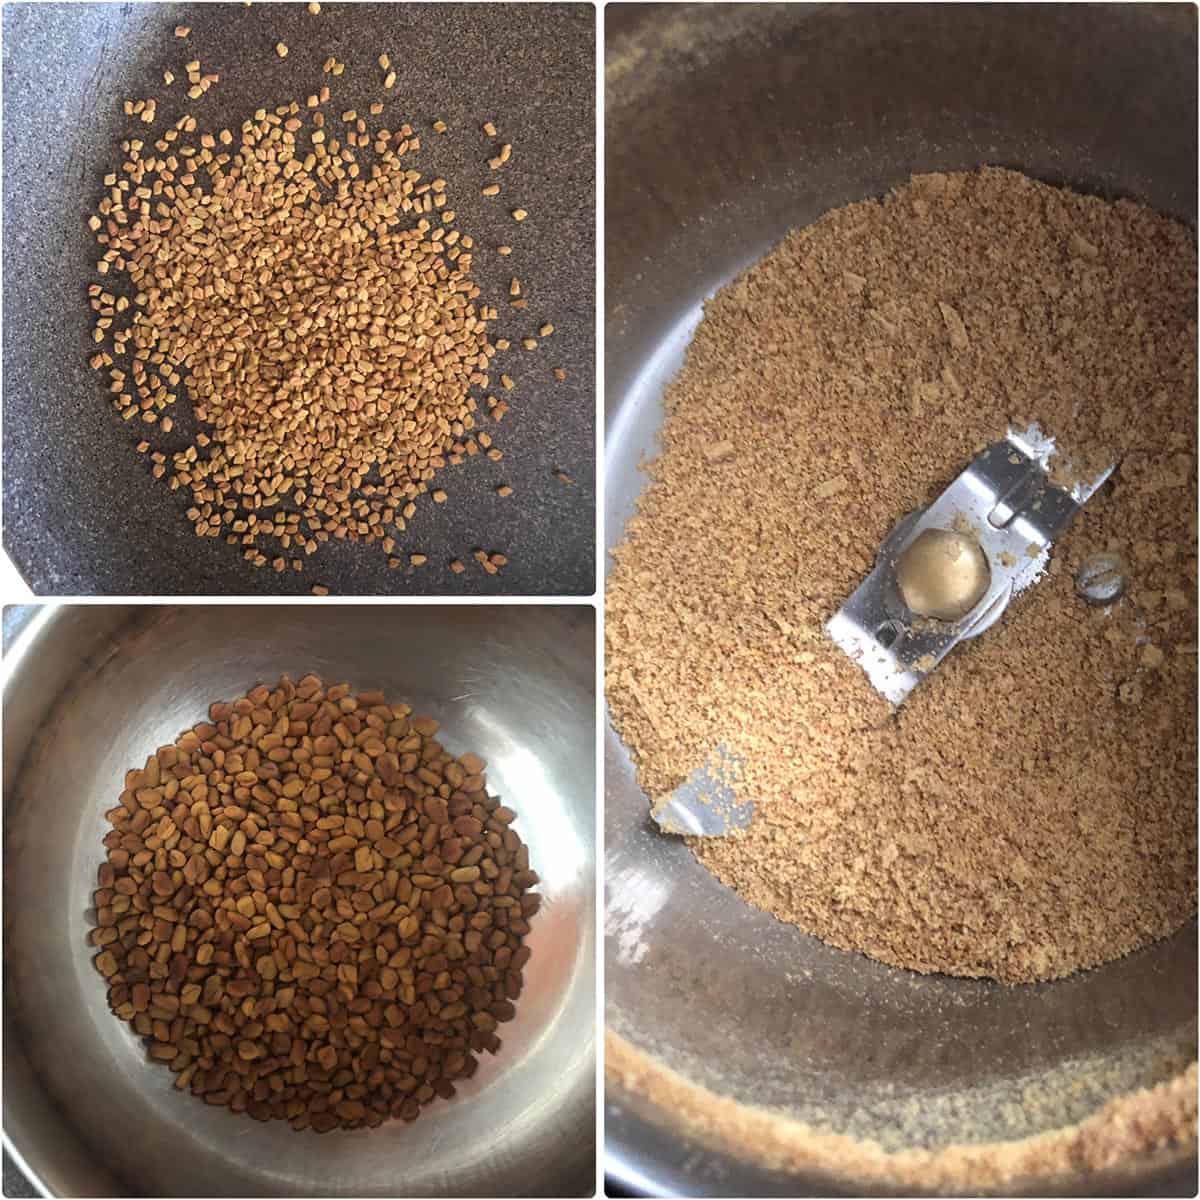 Step by step photos showing roasted and ground fenugreek seeds